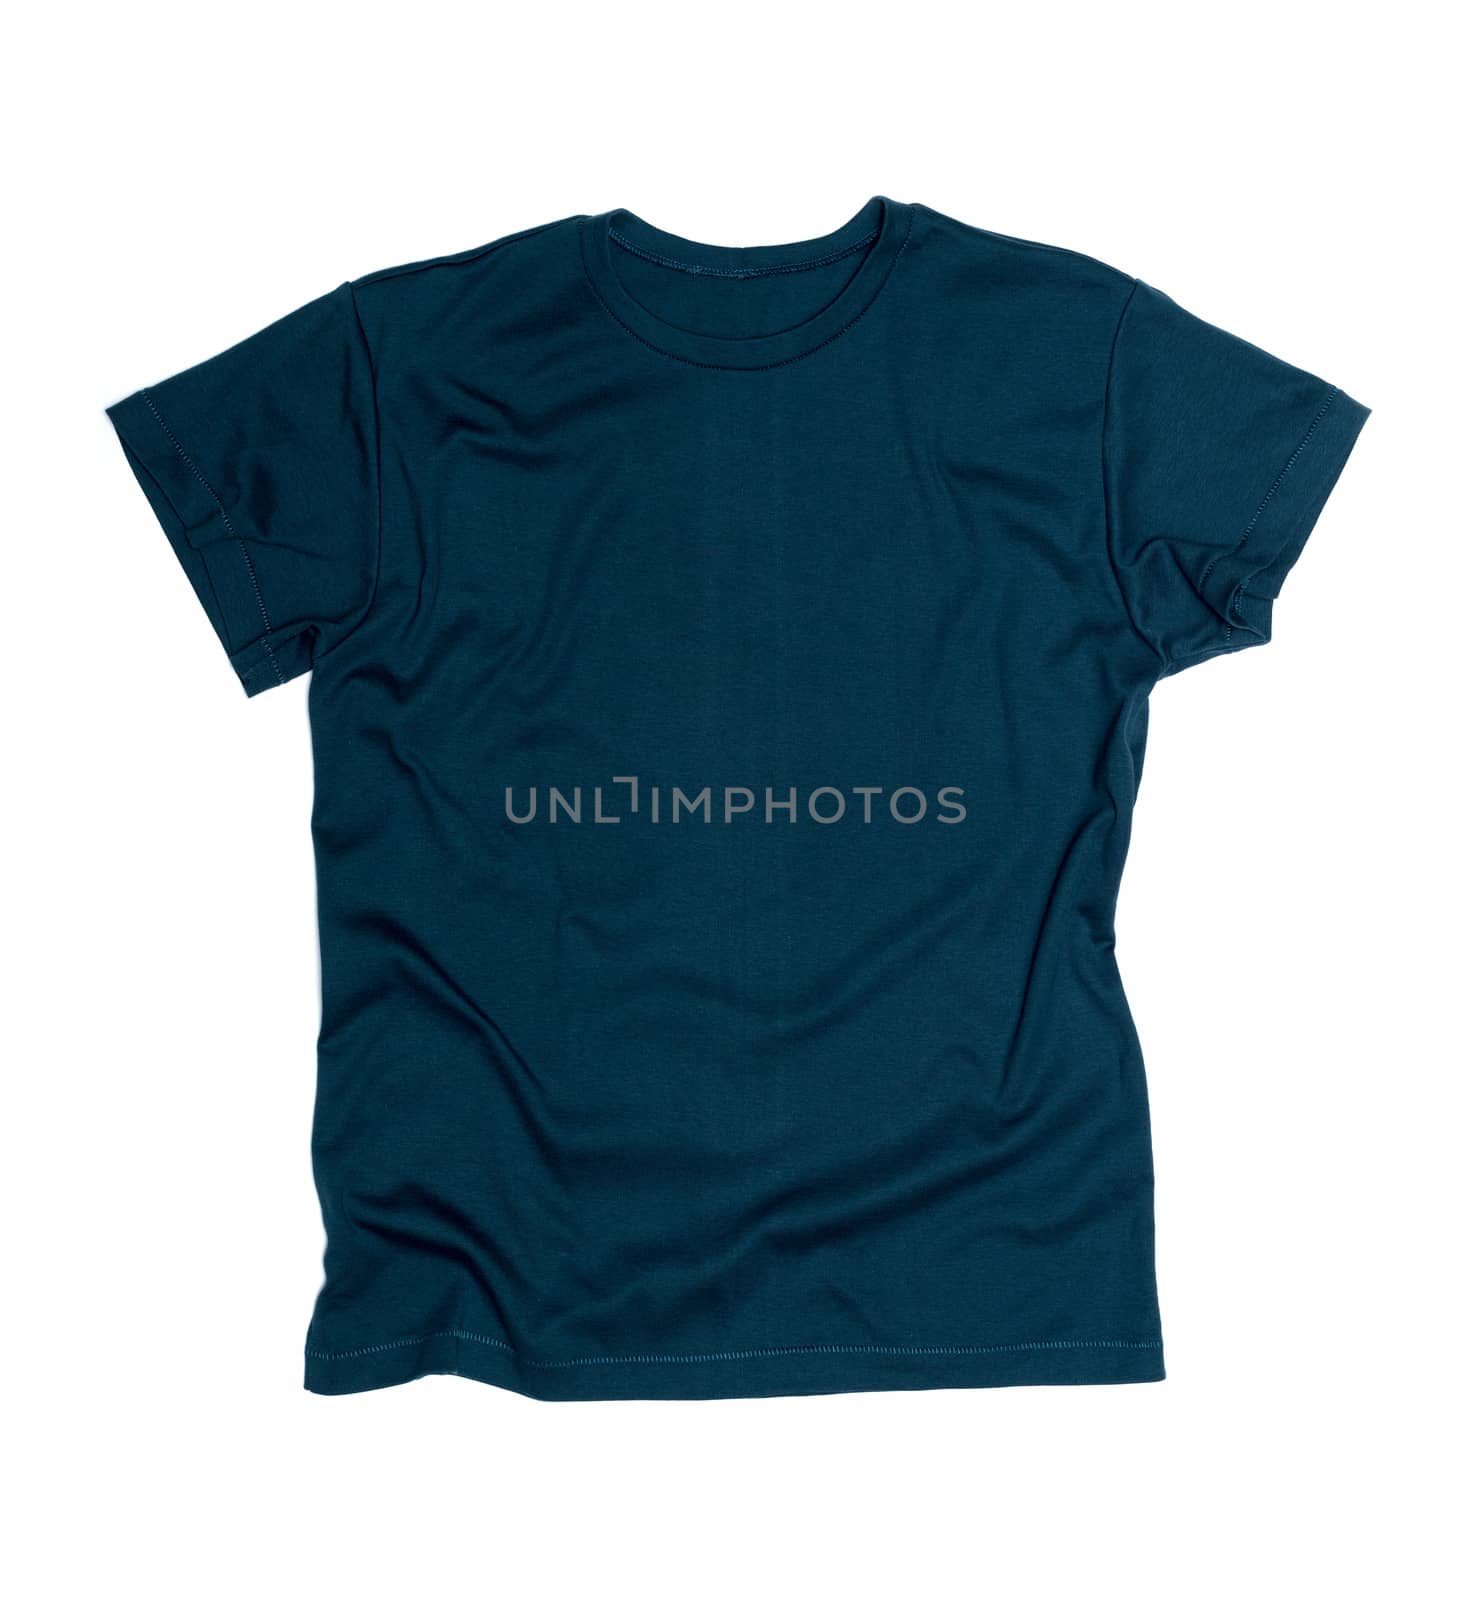 Dark blue tshirt template ready for your own graphics